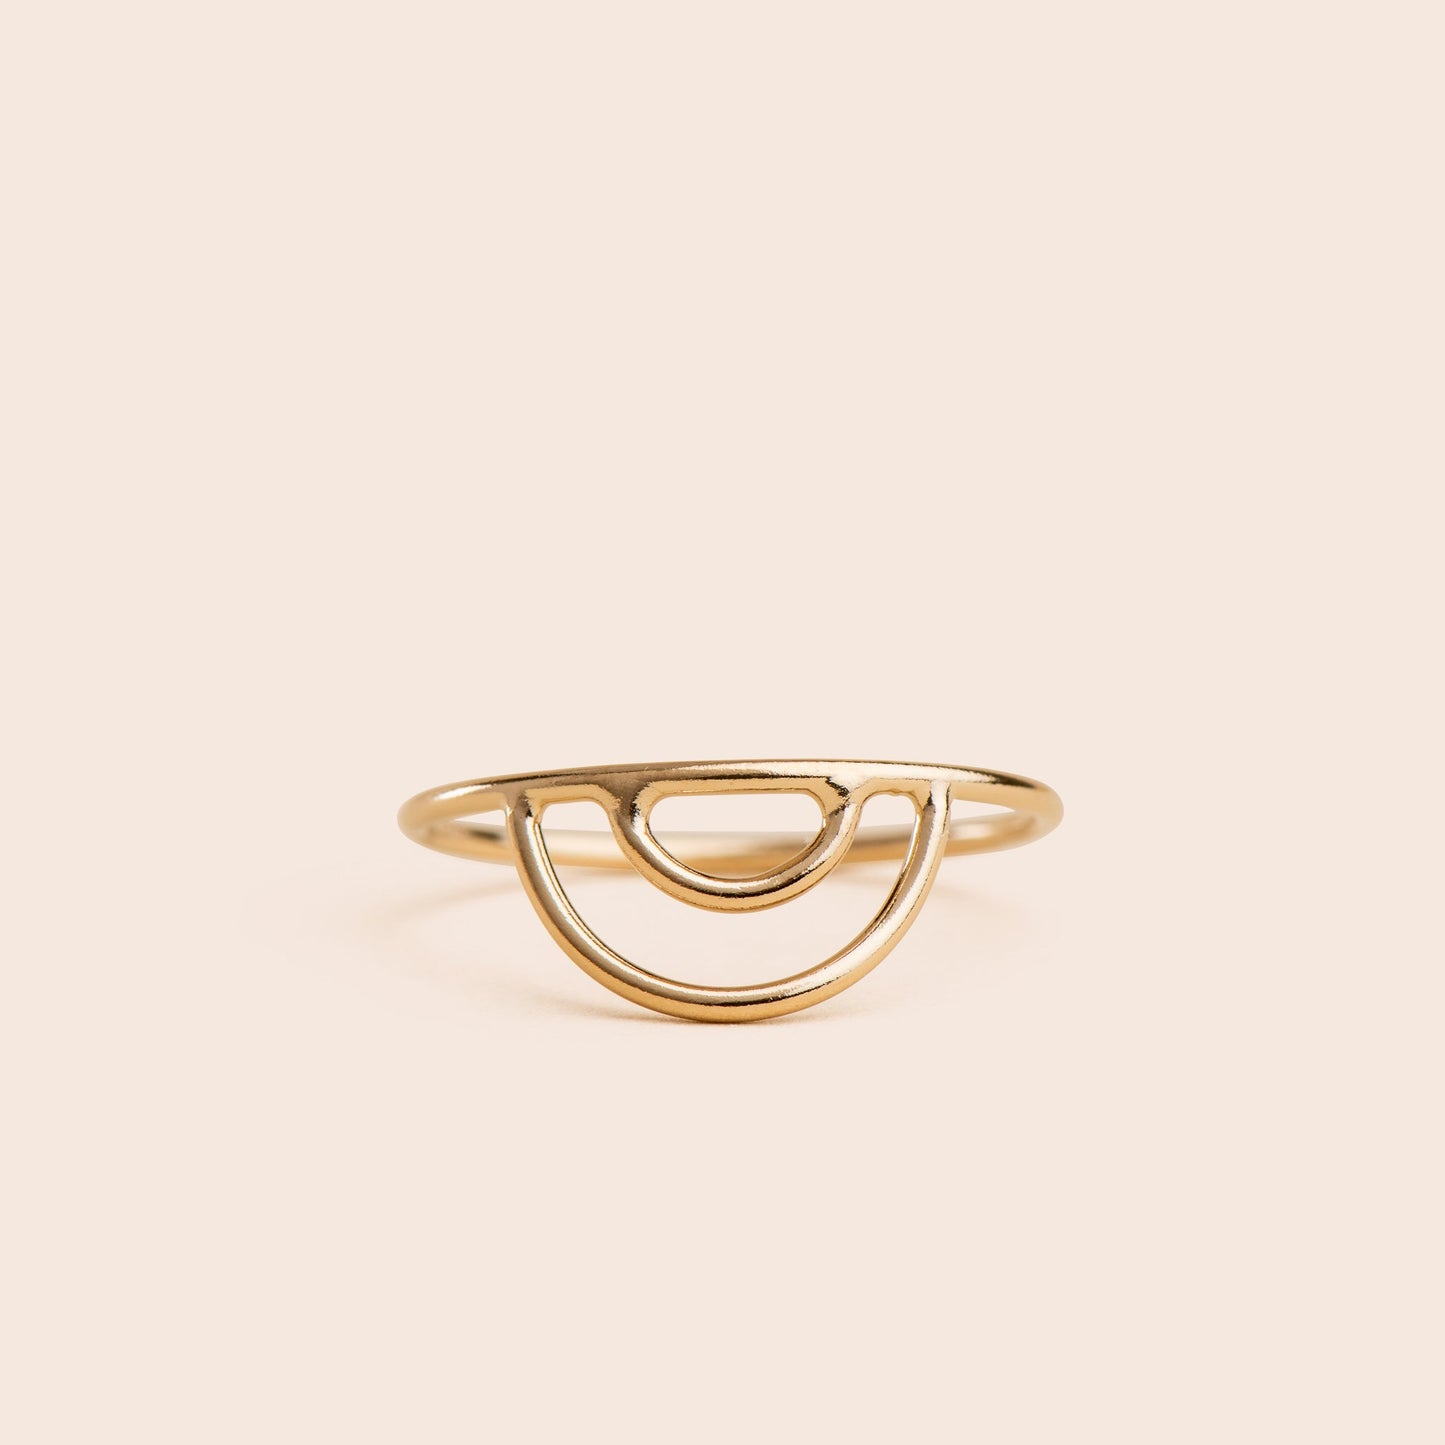 Rainbow - Gold Filled Stacking Ring - Gemlet